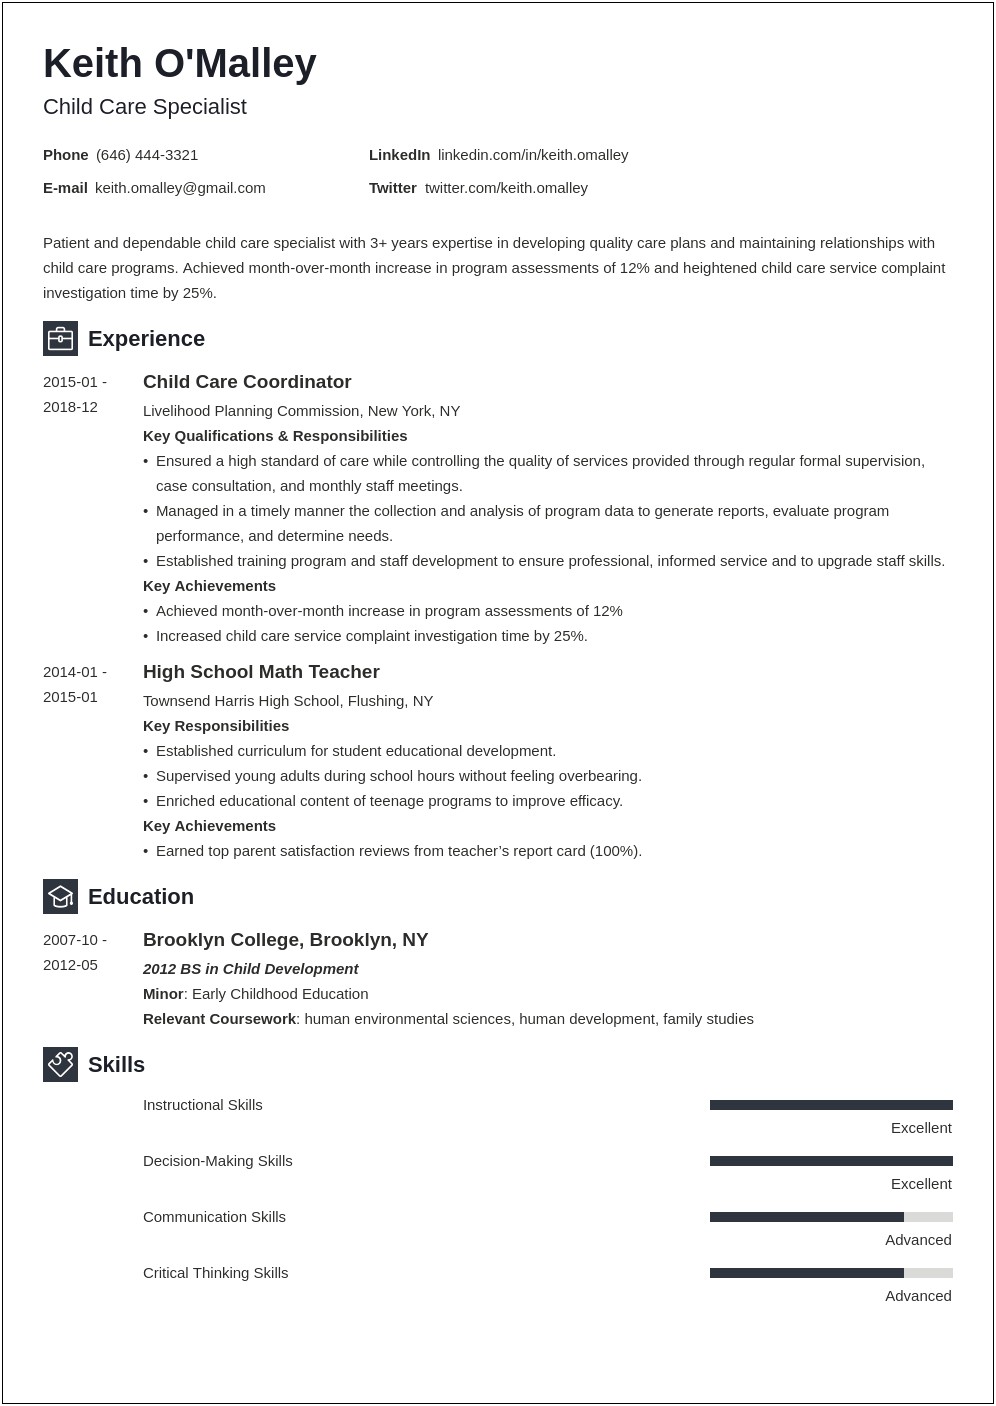 Resume For Before And After School Care